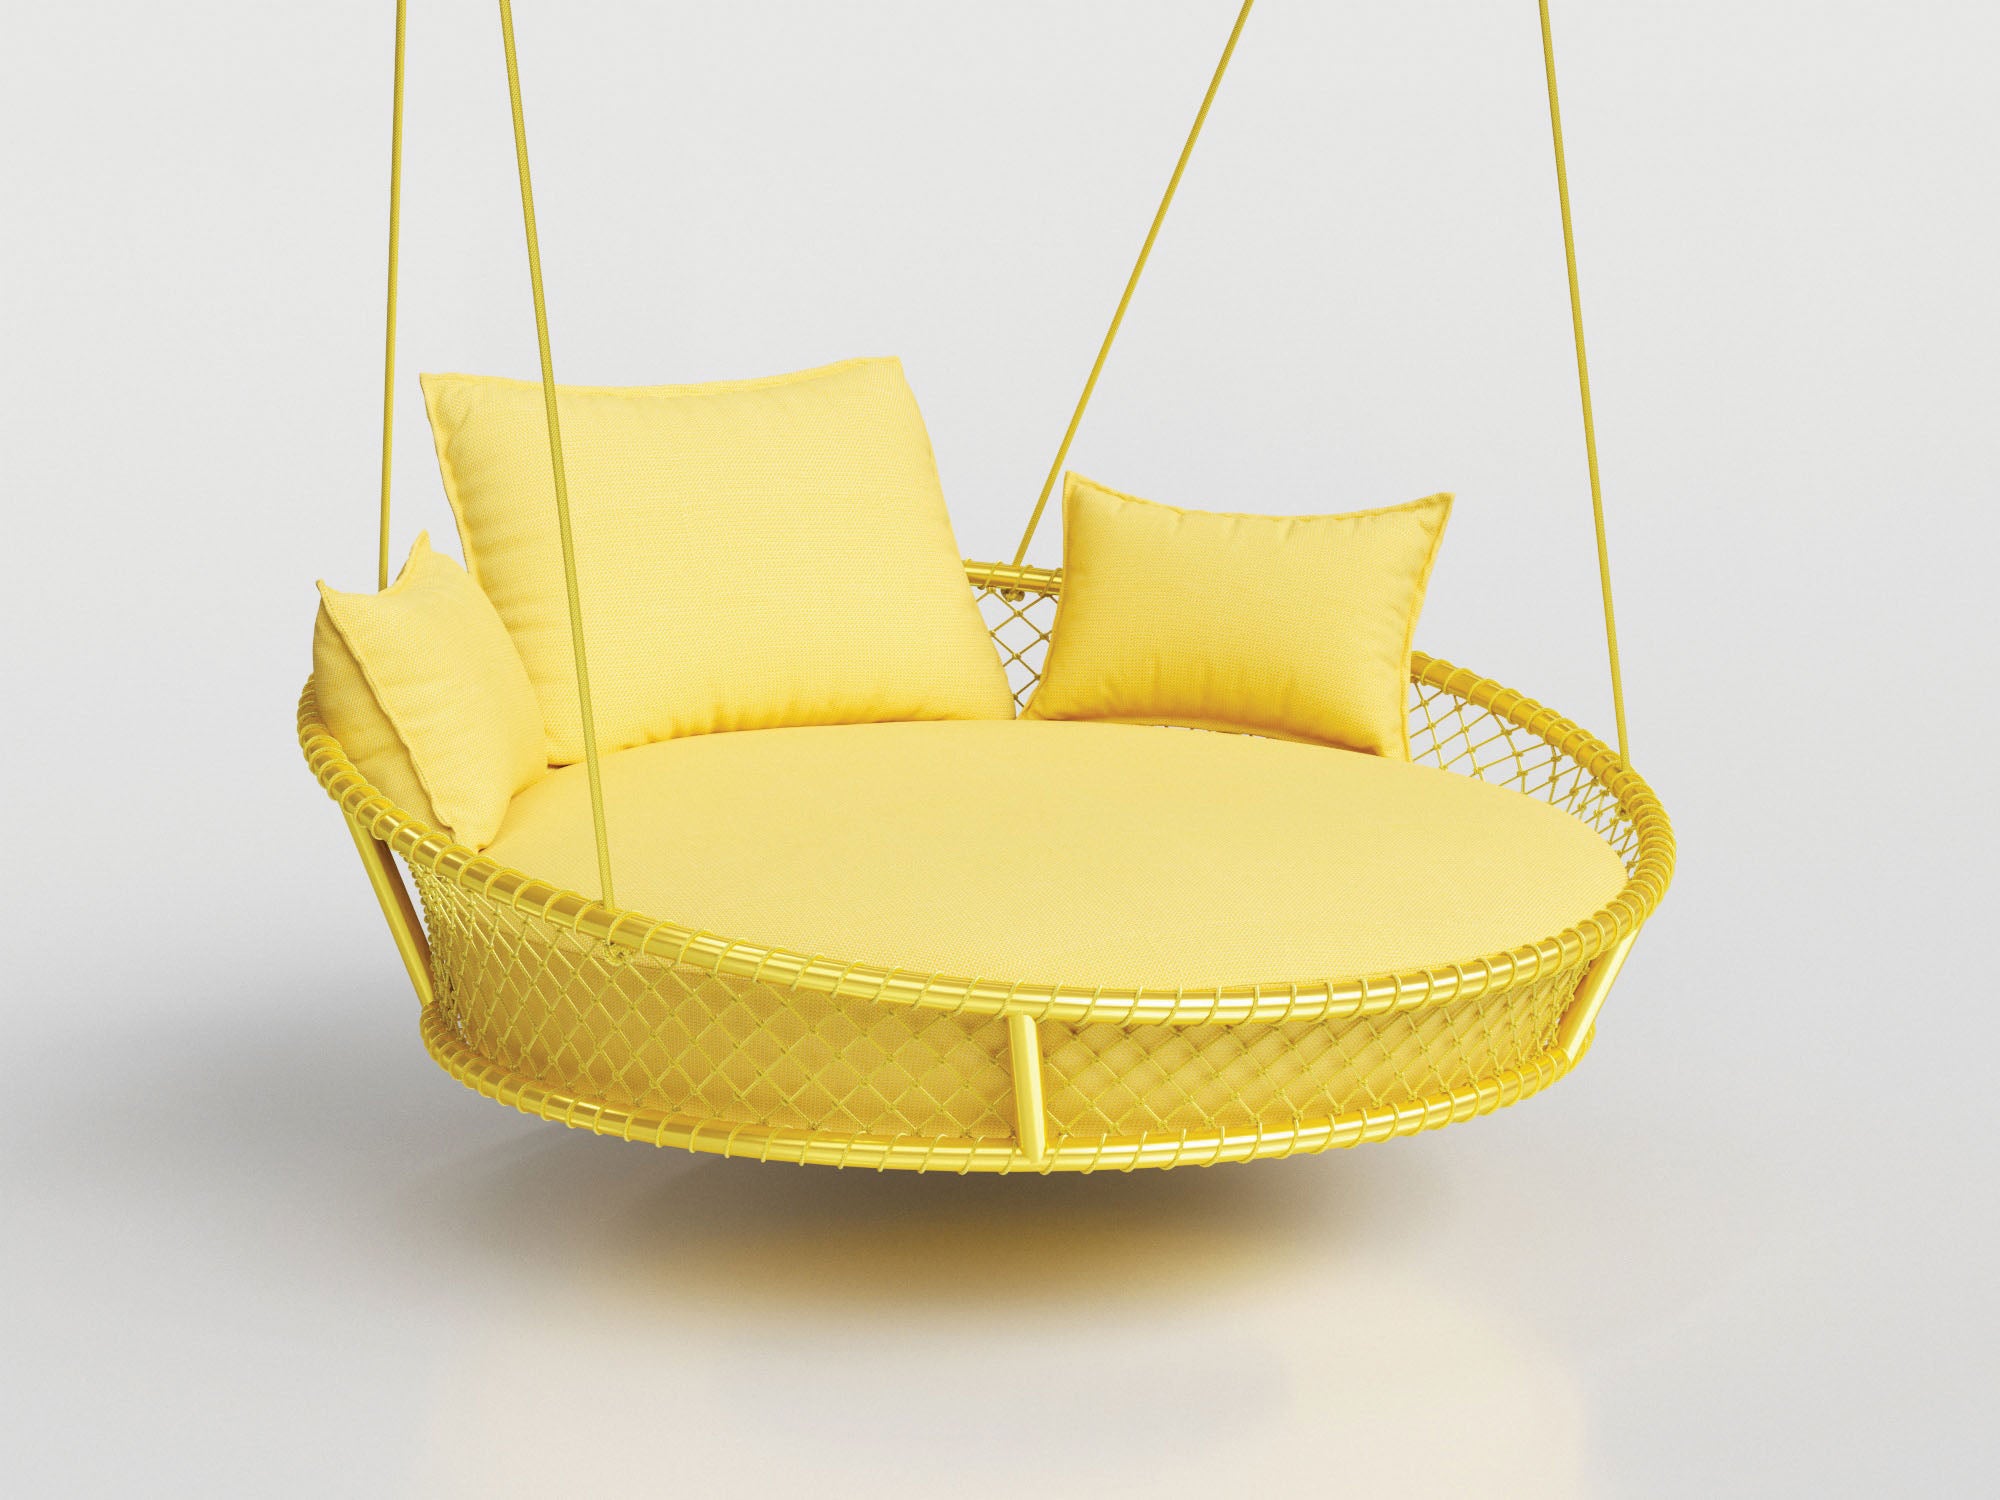 Escuna Standart Swing in yellow nautical rope with upholstered seat and cushions, designed by Maria Cândida Machado